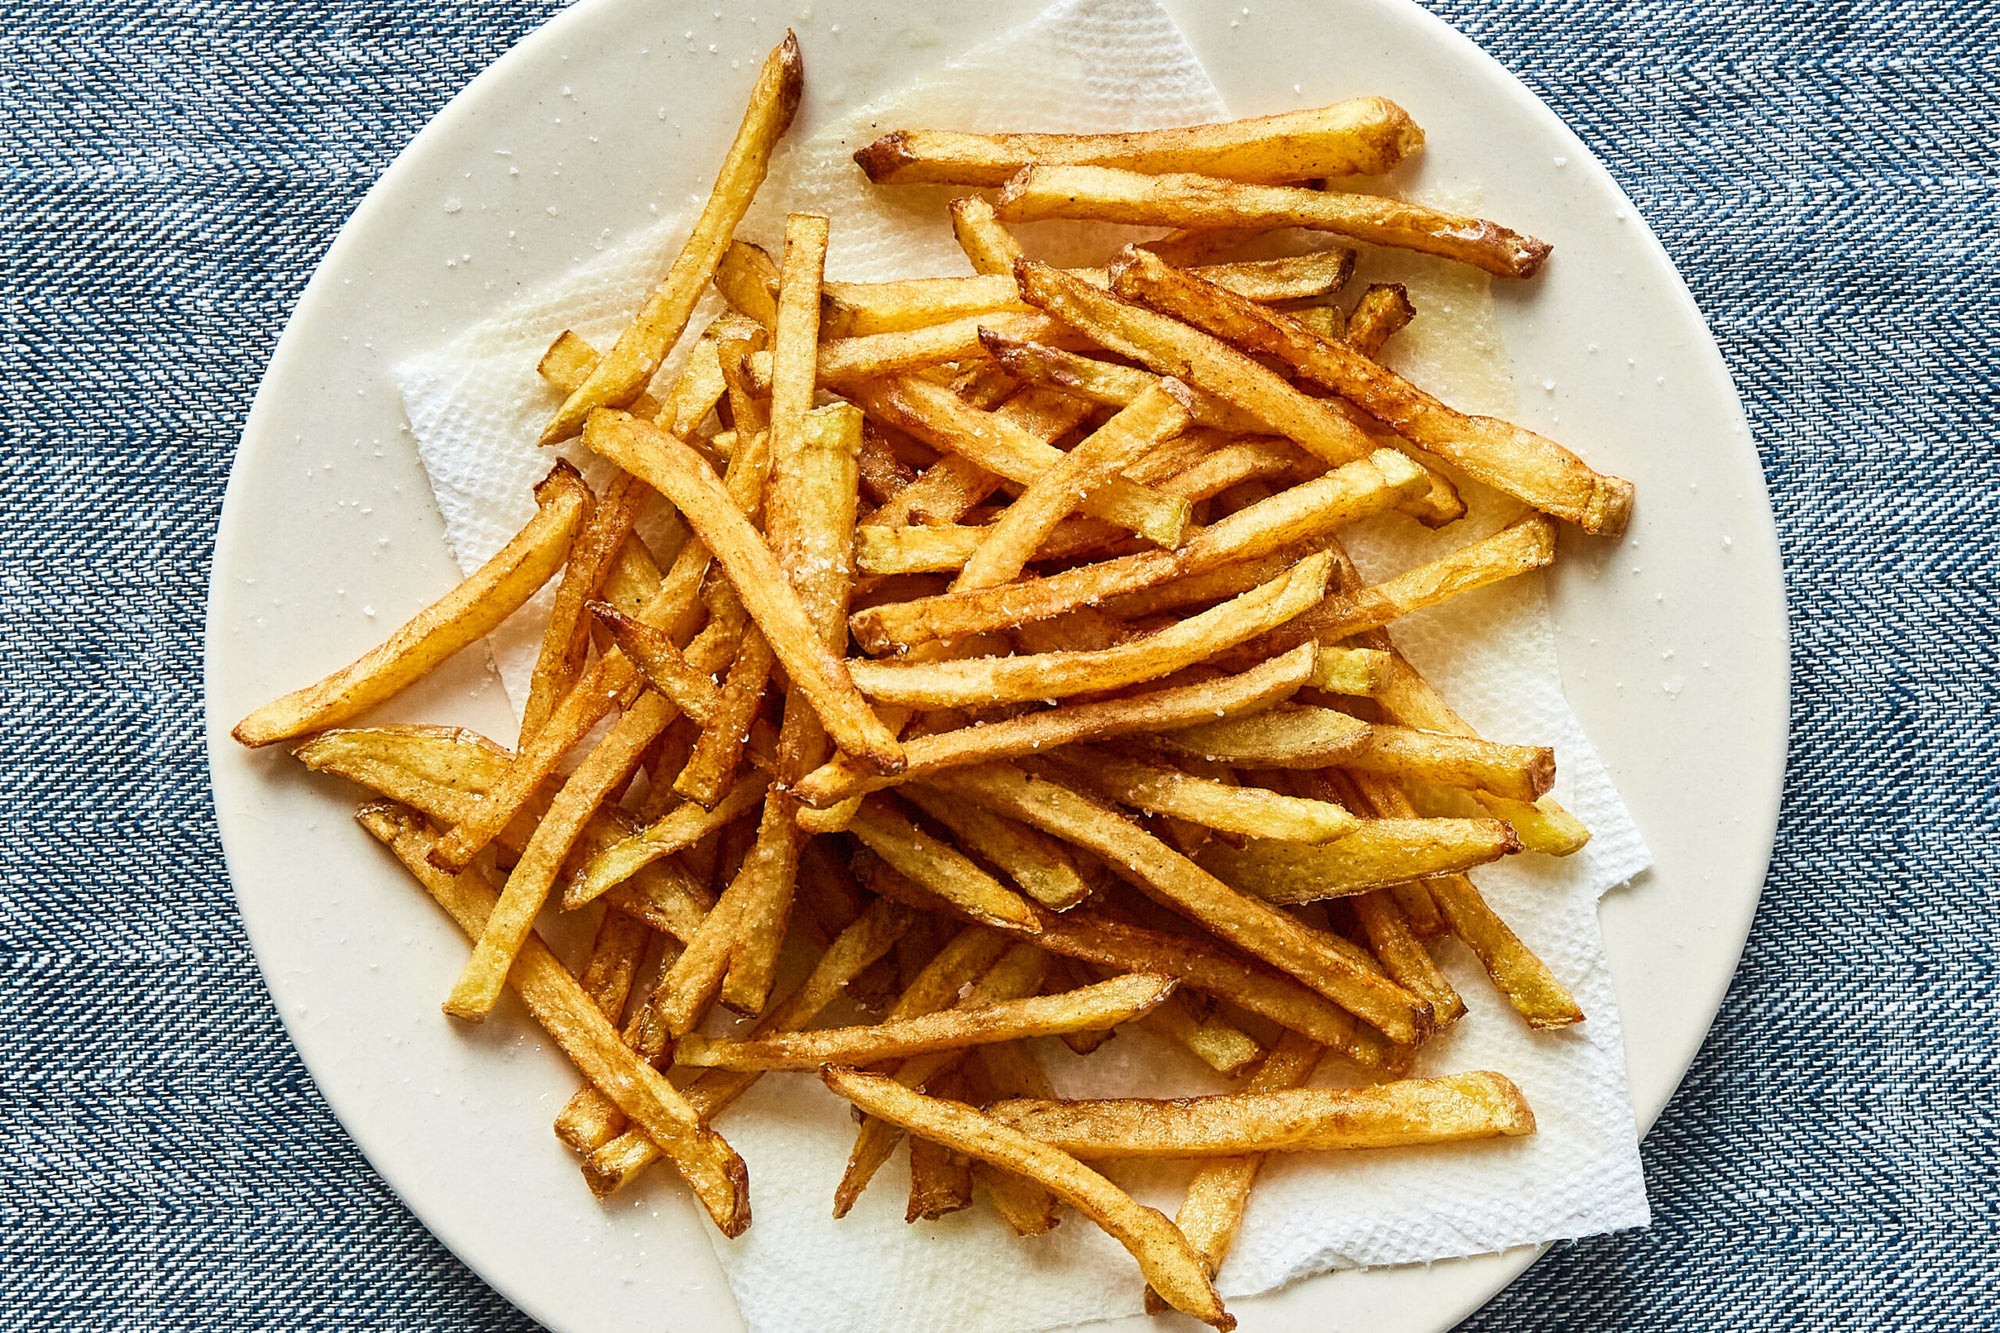 https://www.saveur.com/uploads/2022/09/19/00-LEAD-french-fry-cutters-saveur-scaled.jpg?auto=webp&width=2000&height=1333